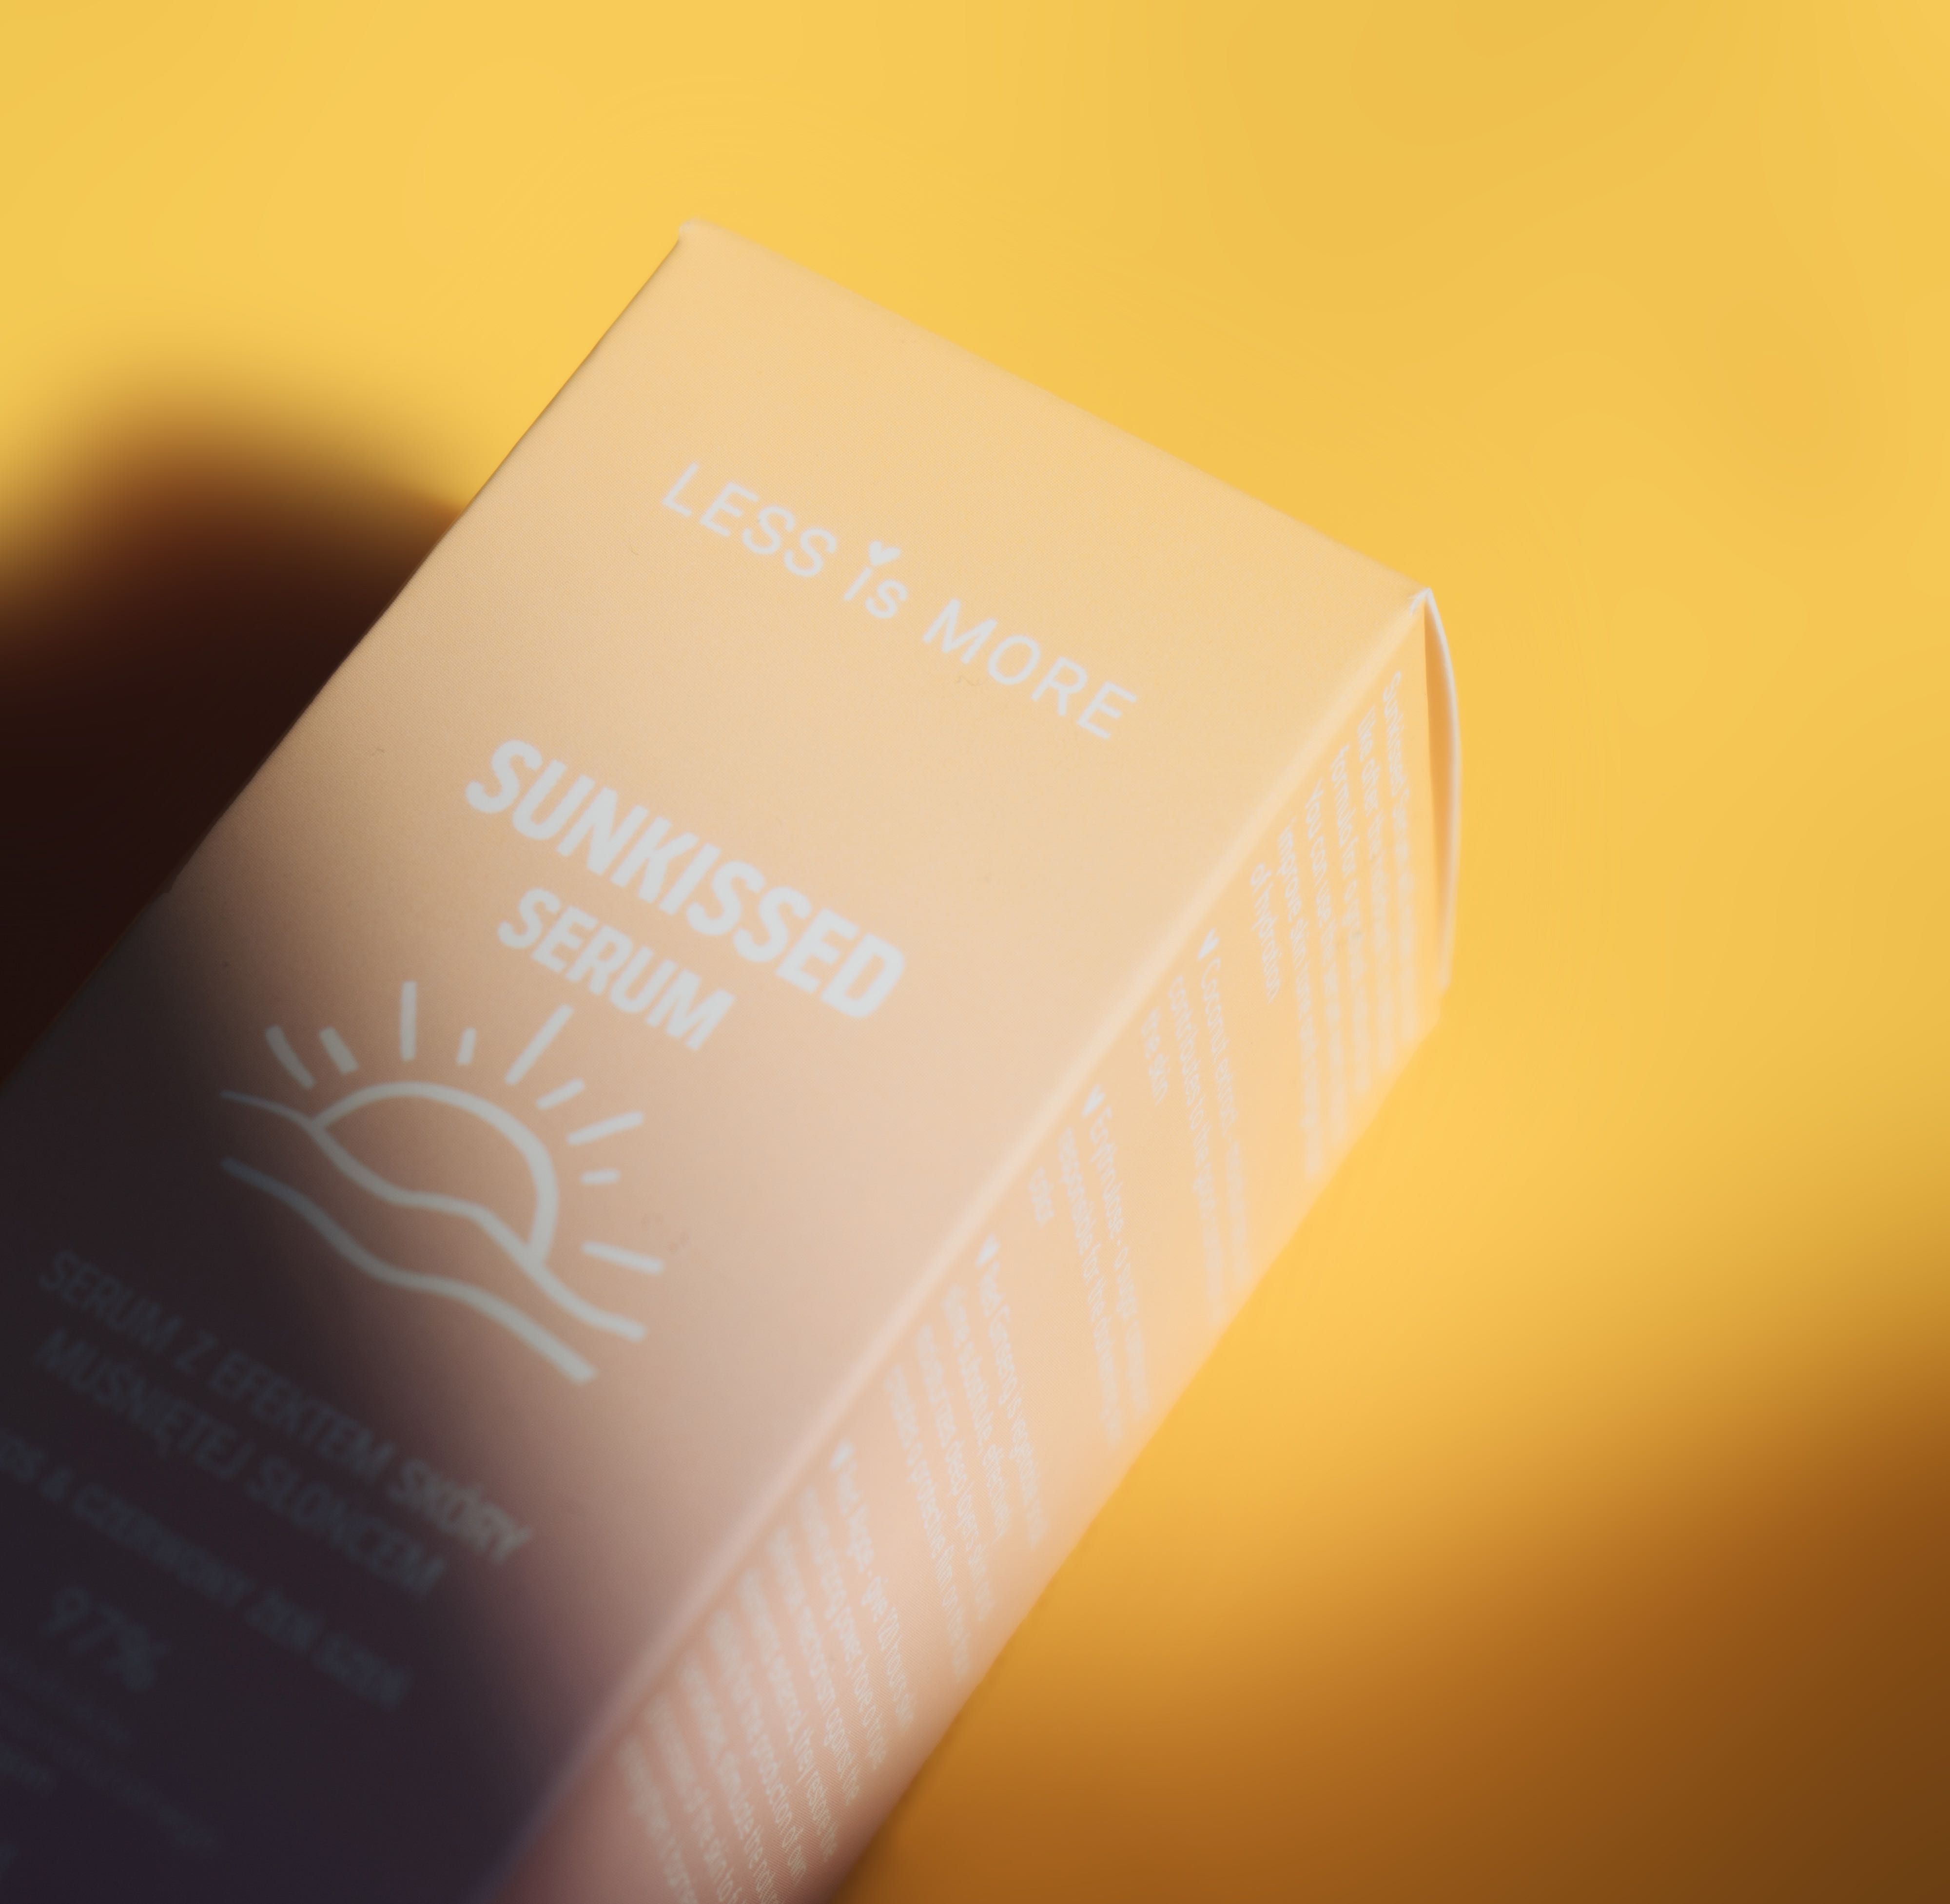 Less is More Sunkissed Serum 60 ml nowe